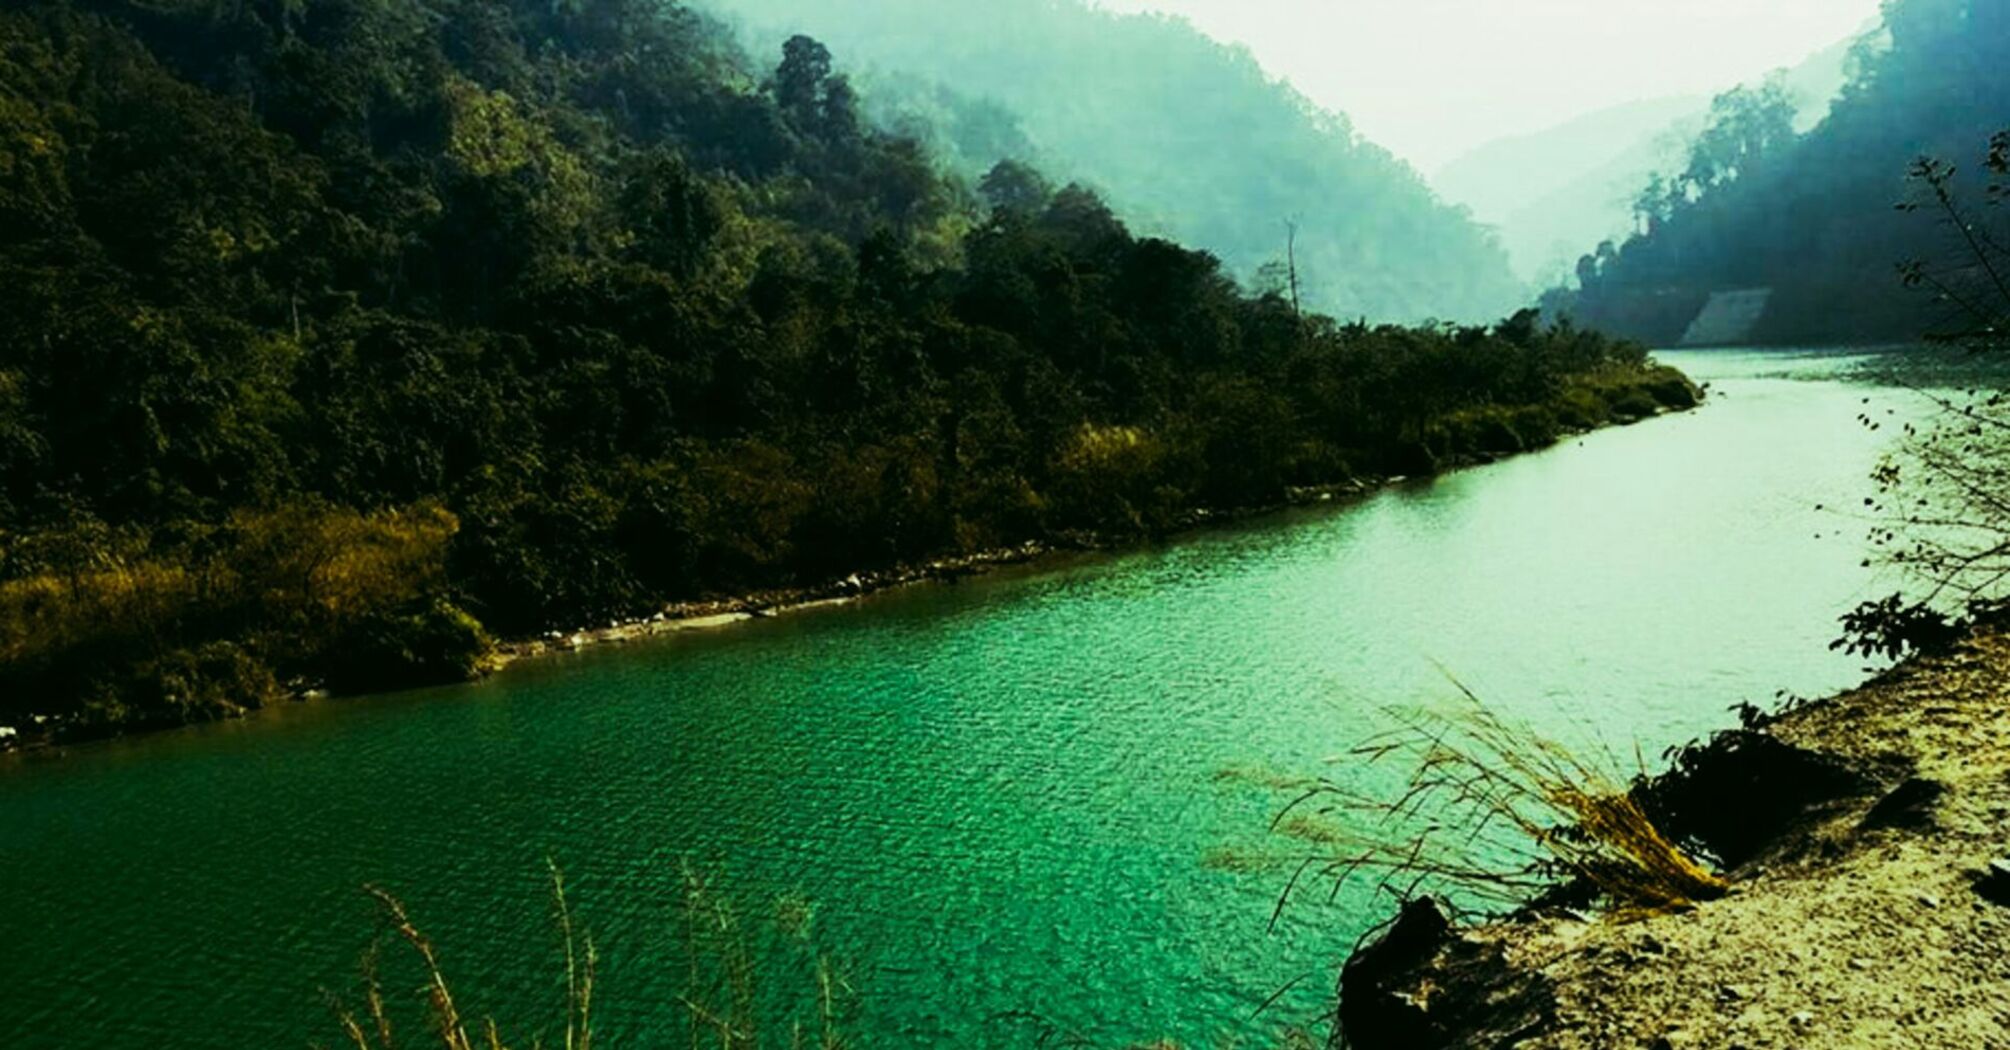 Teesta River in North Bengal with lush green surroundings